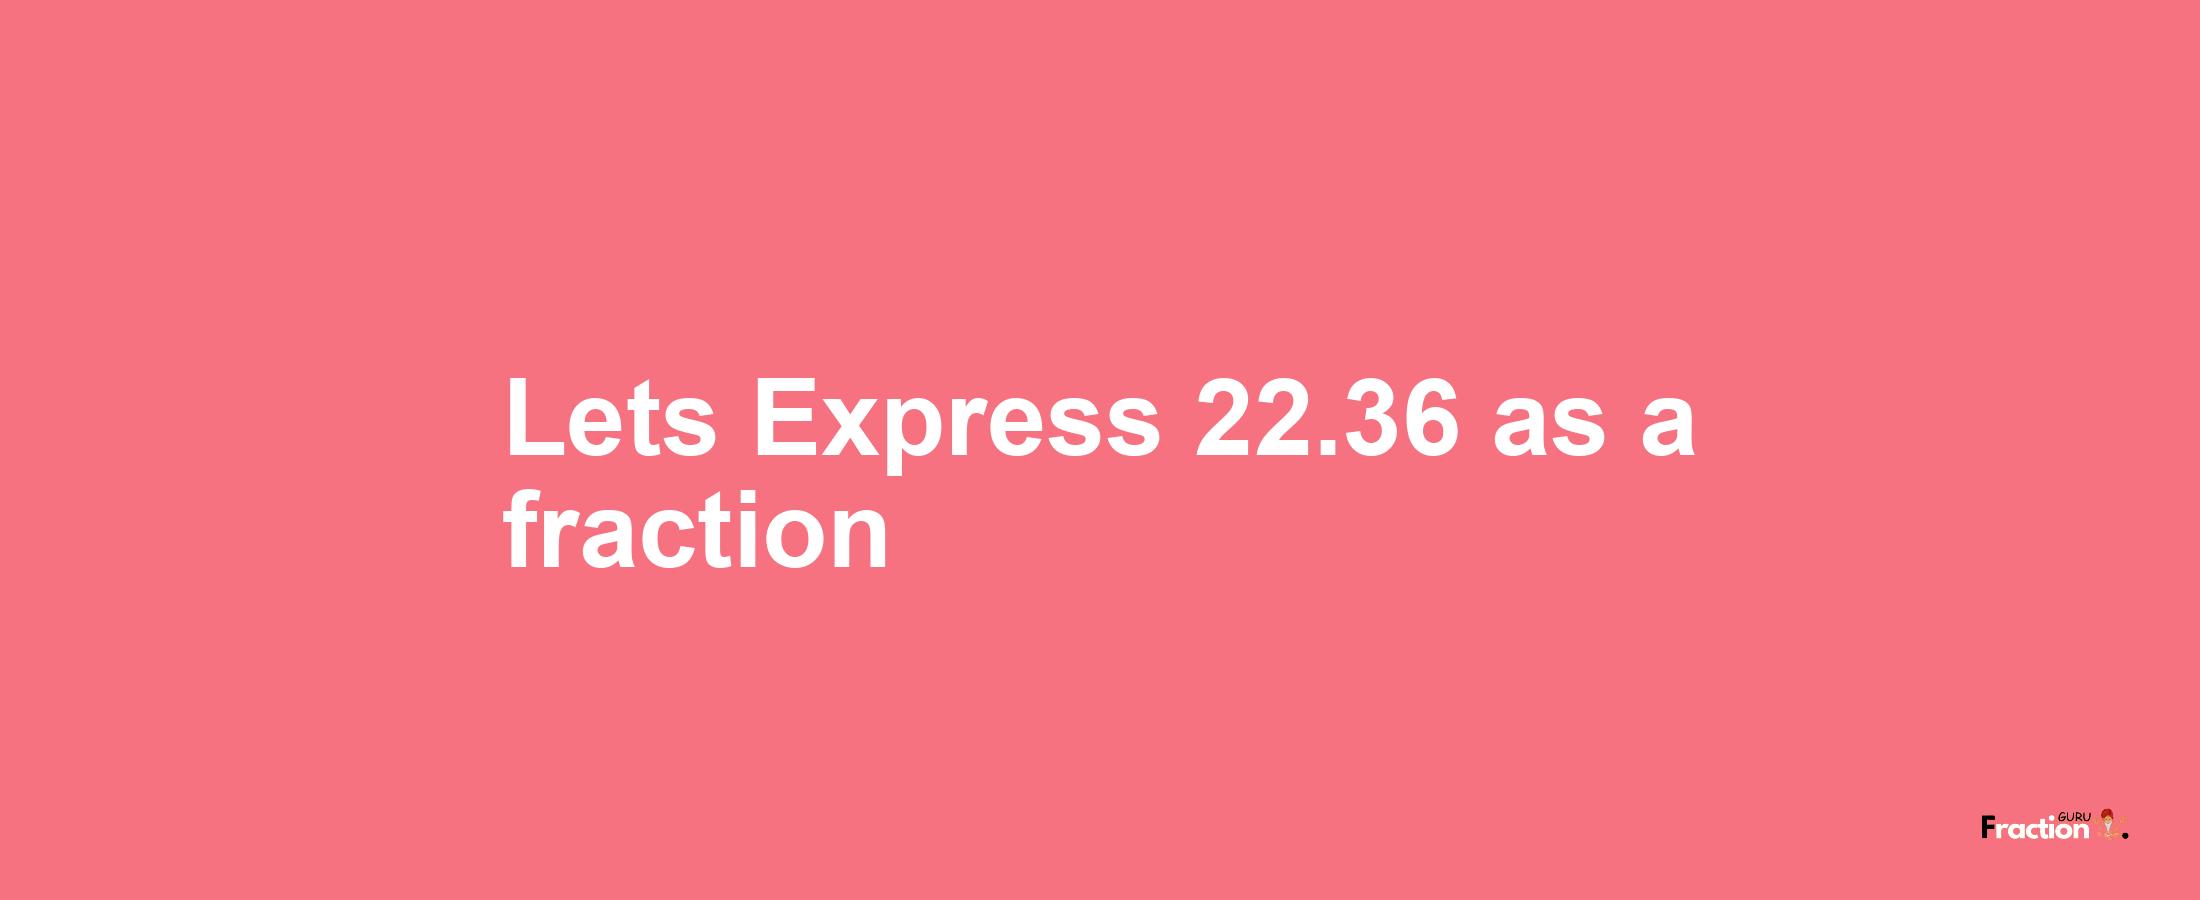 Lets Express 22.36 as afraction